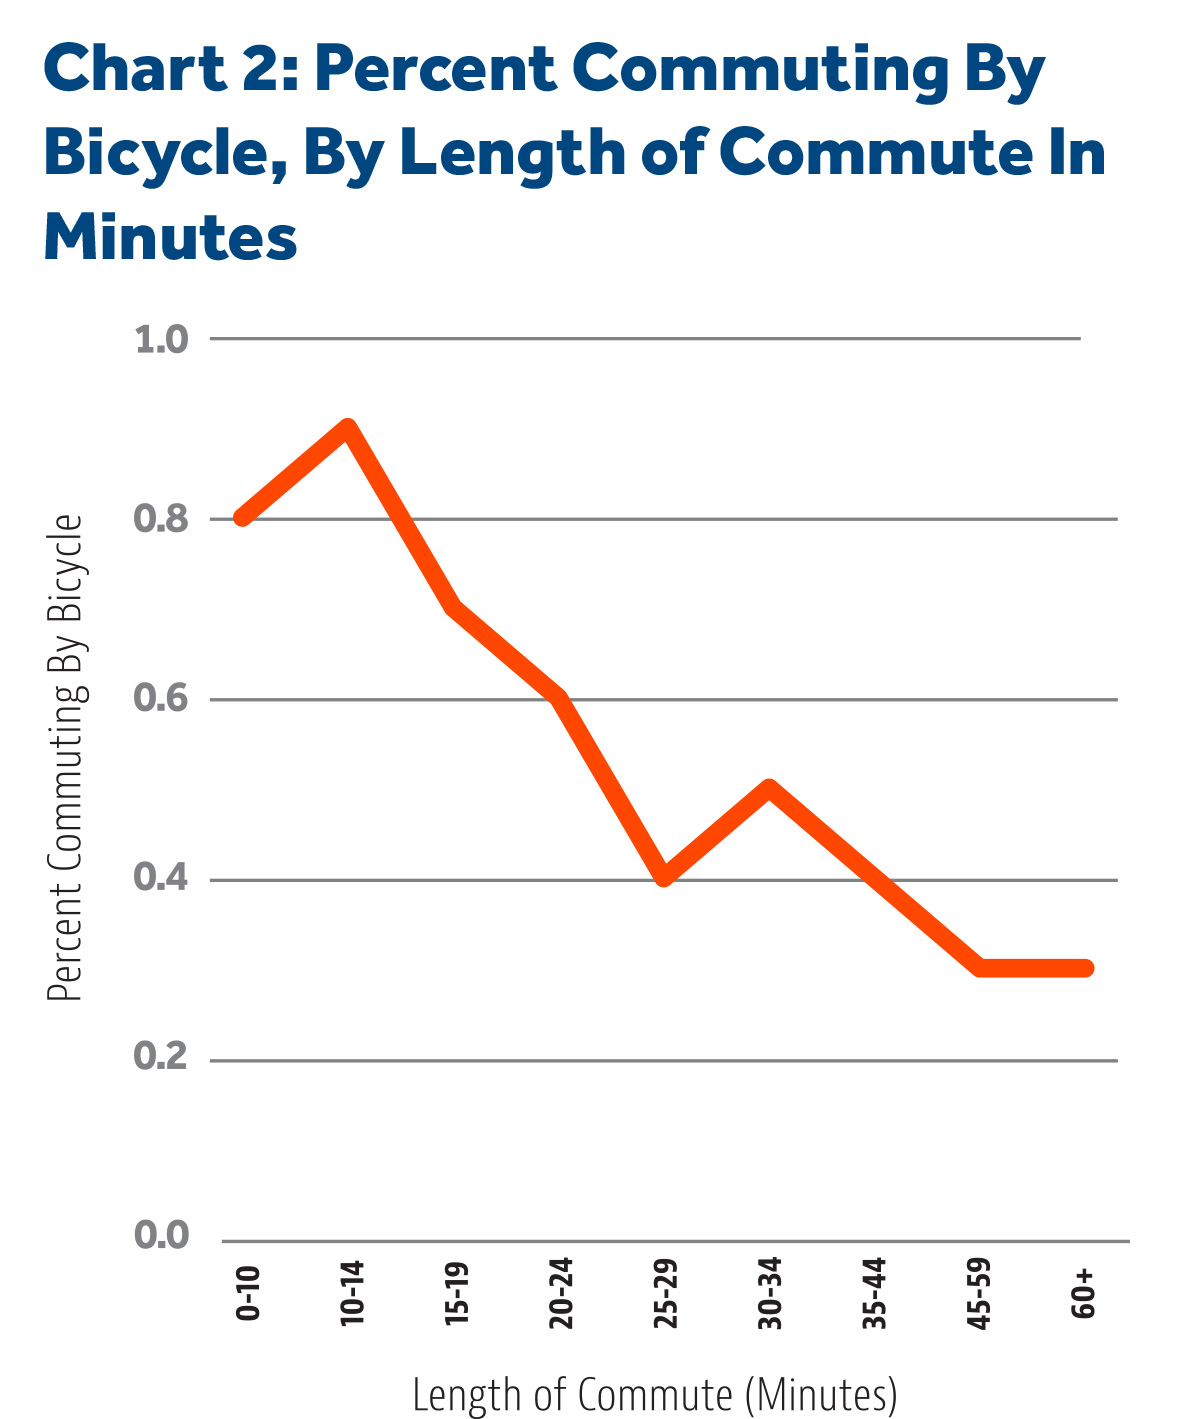 Percent Commuting By Bicycle, By Length of Commute In Minutes